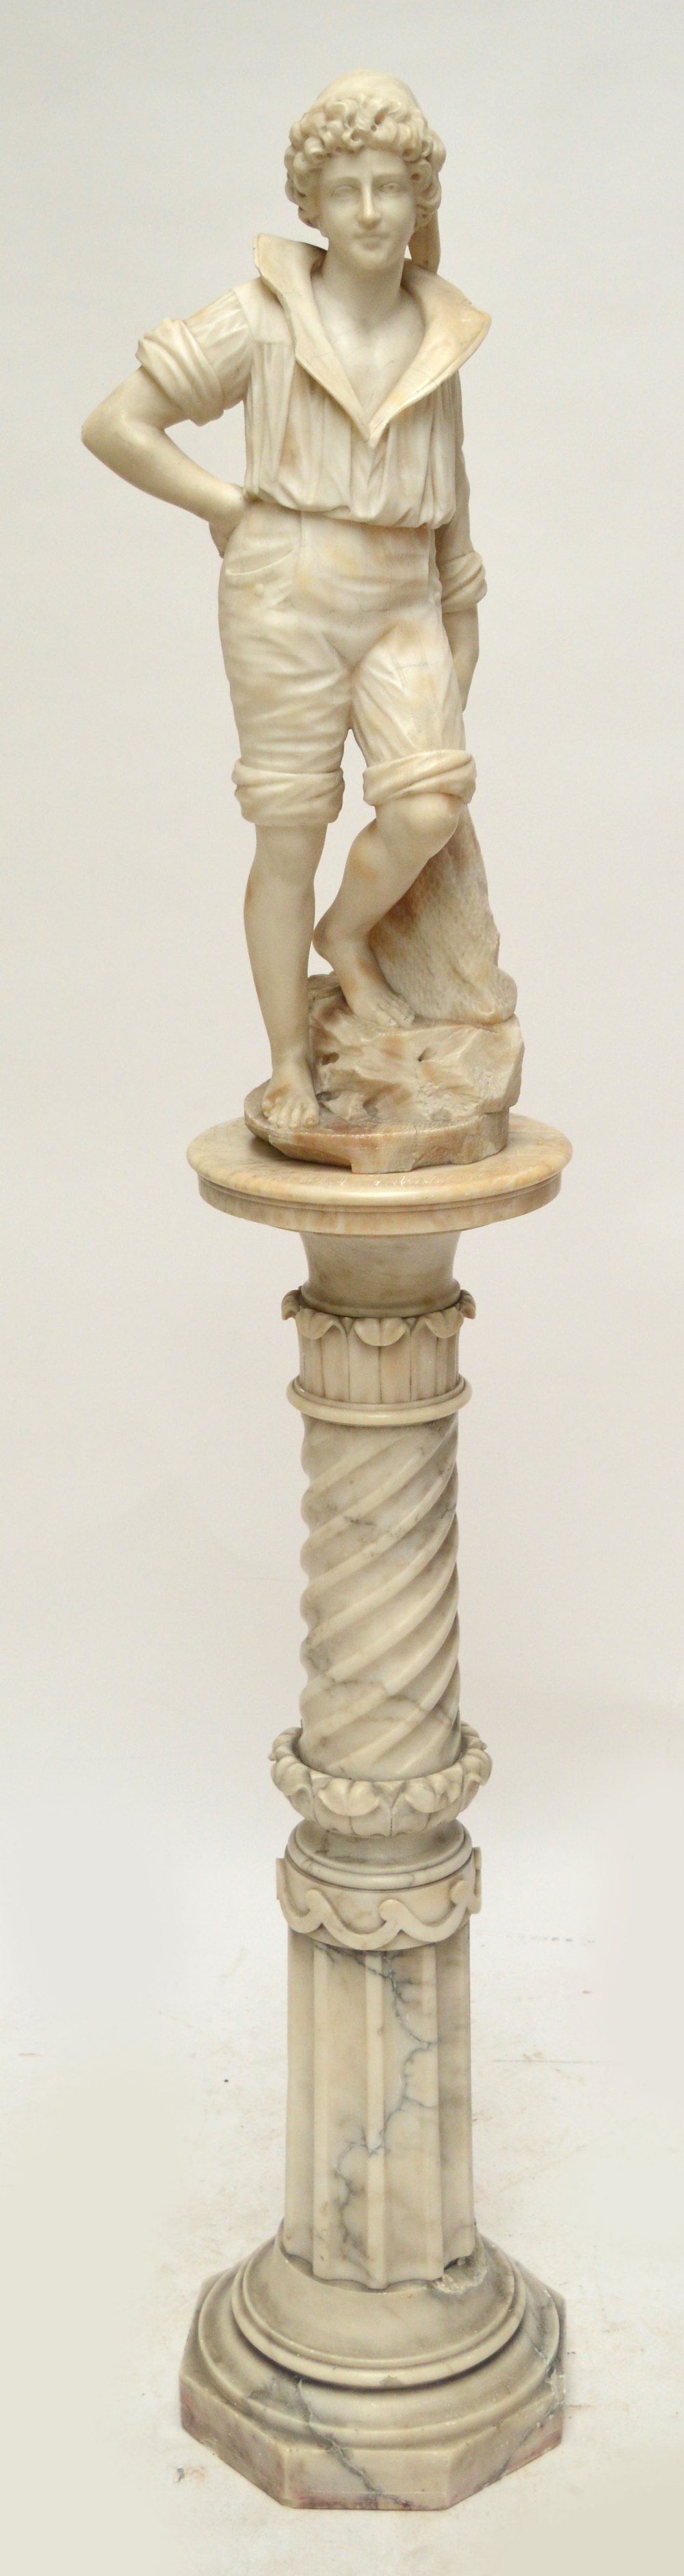 A late 19th/early 20th century carrara alabaster figure of a young fisherman modelled with a net